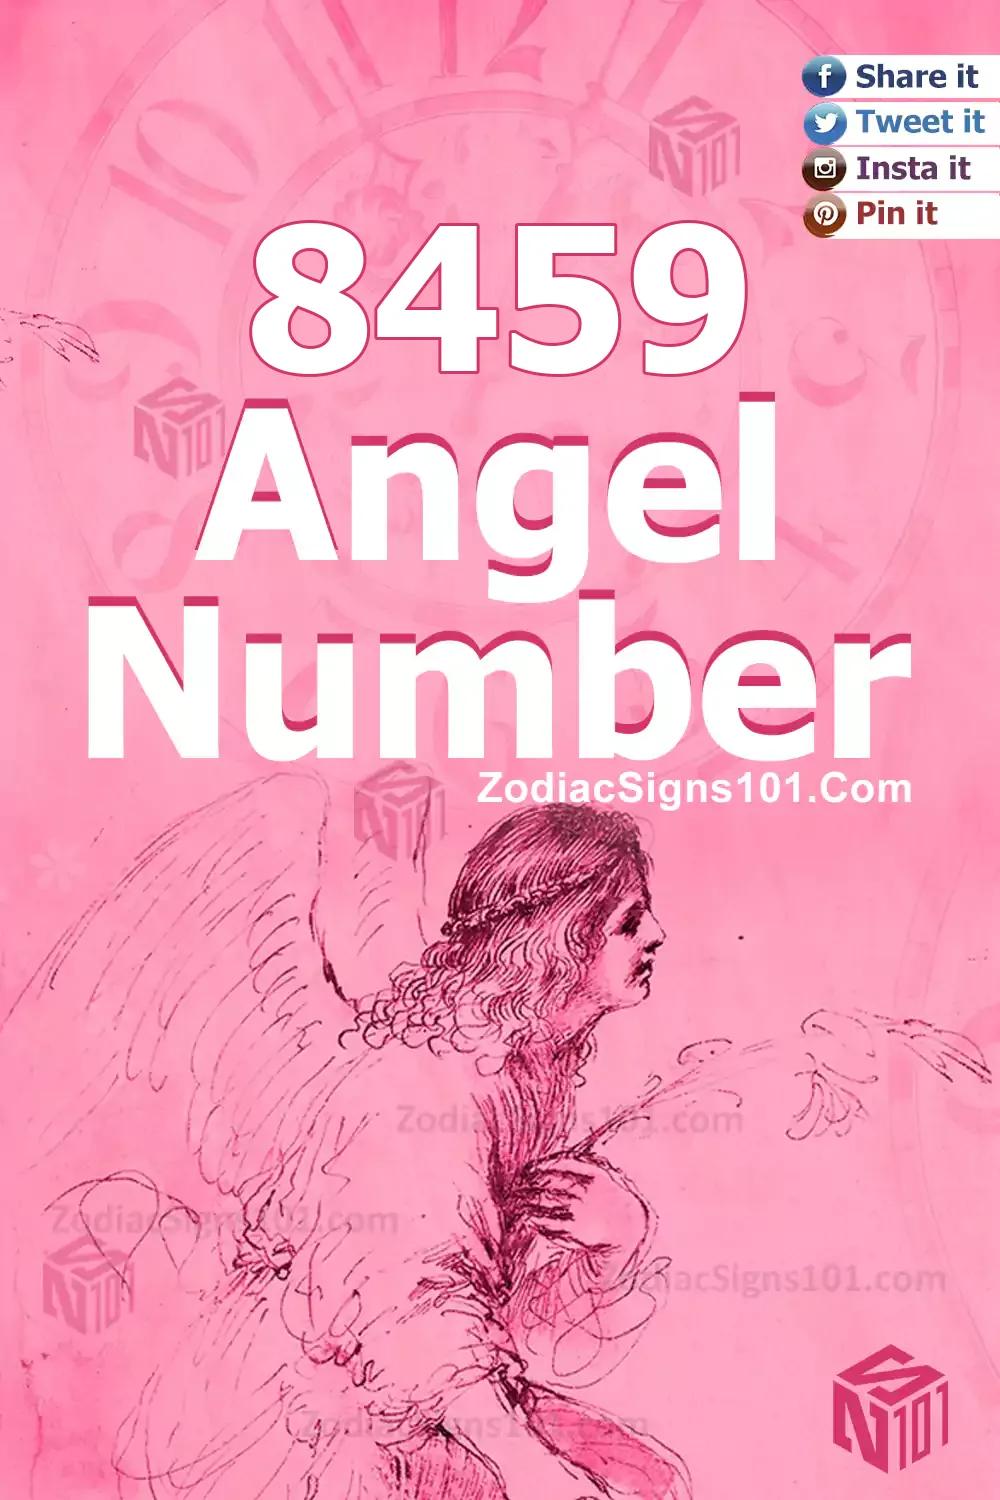 8459 Angel Number Meaning